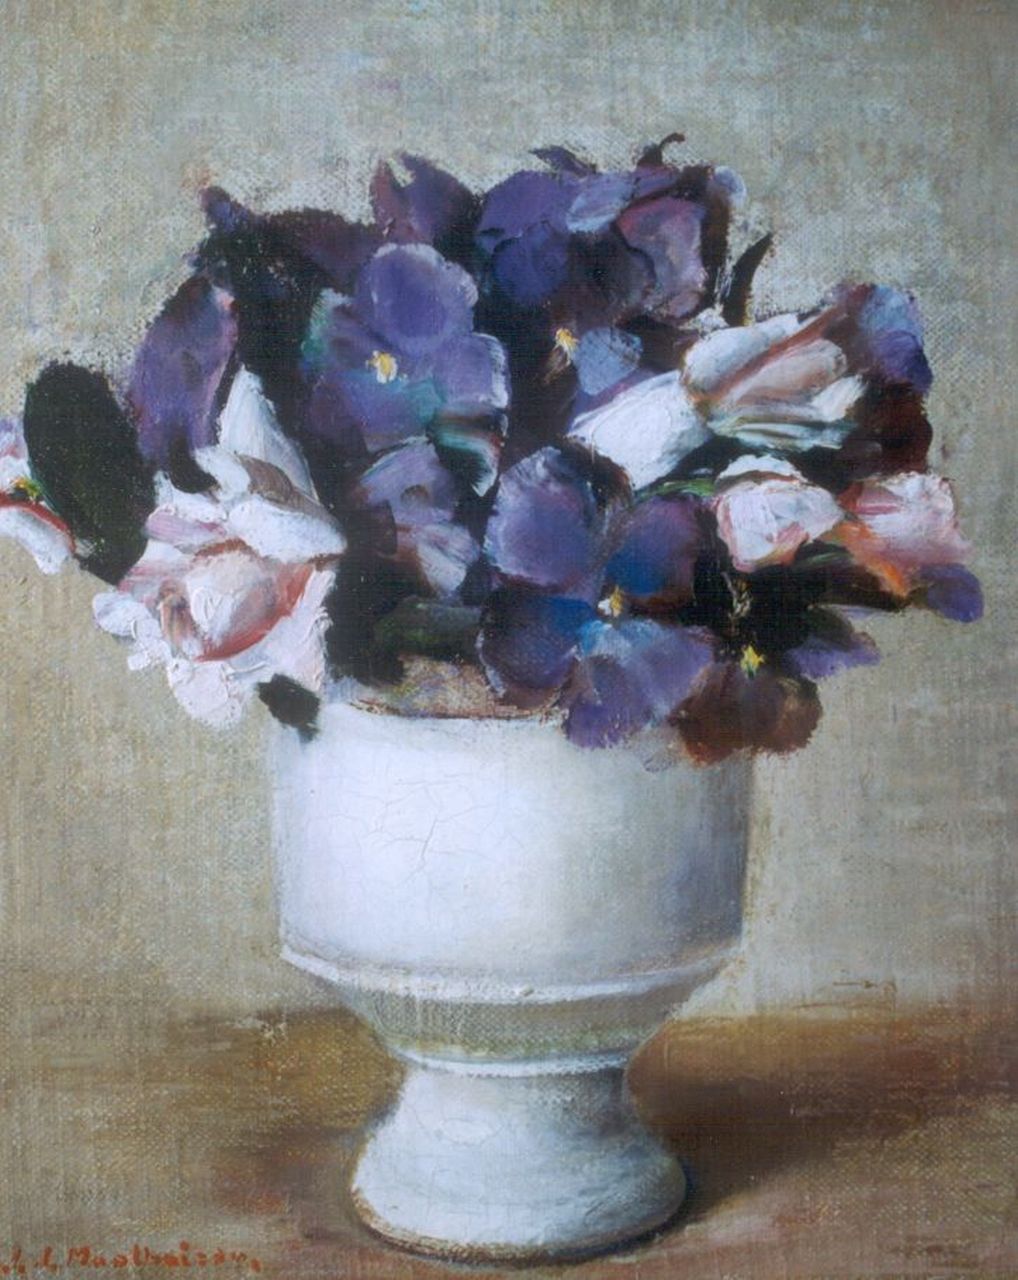 Jan Jurriën Moolhuizen | A still life with violets and roses, oil on canvas laid down on panel, 29.0 x 23.6 cm, signed l.l.